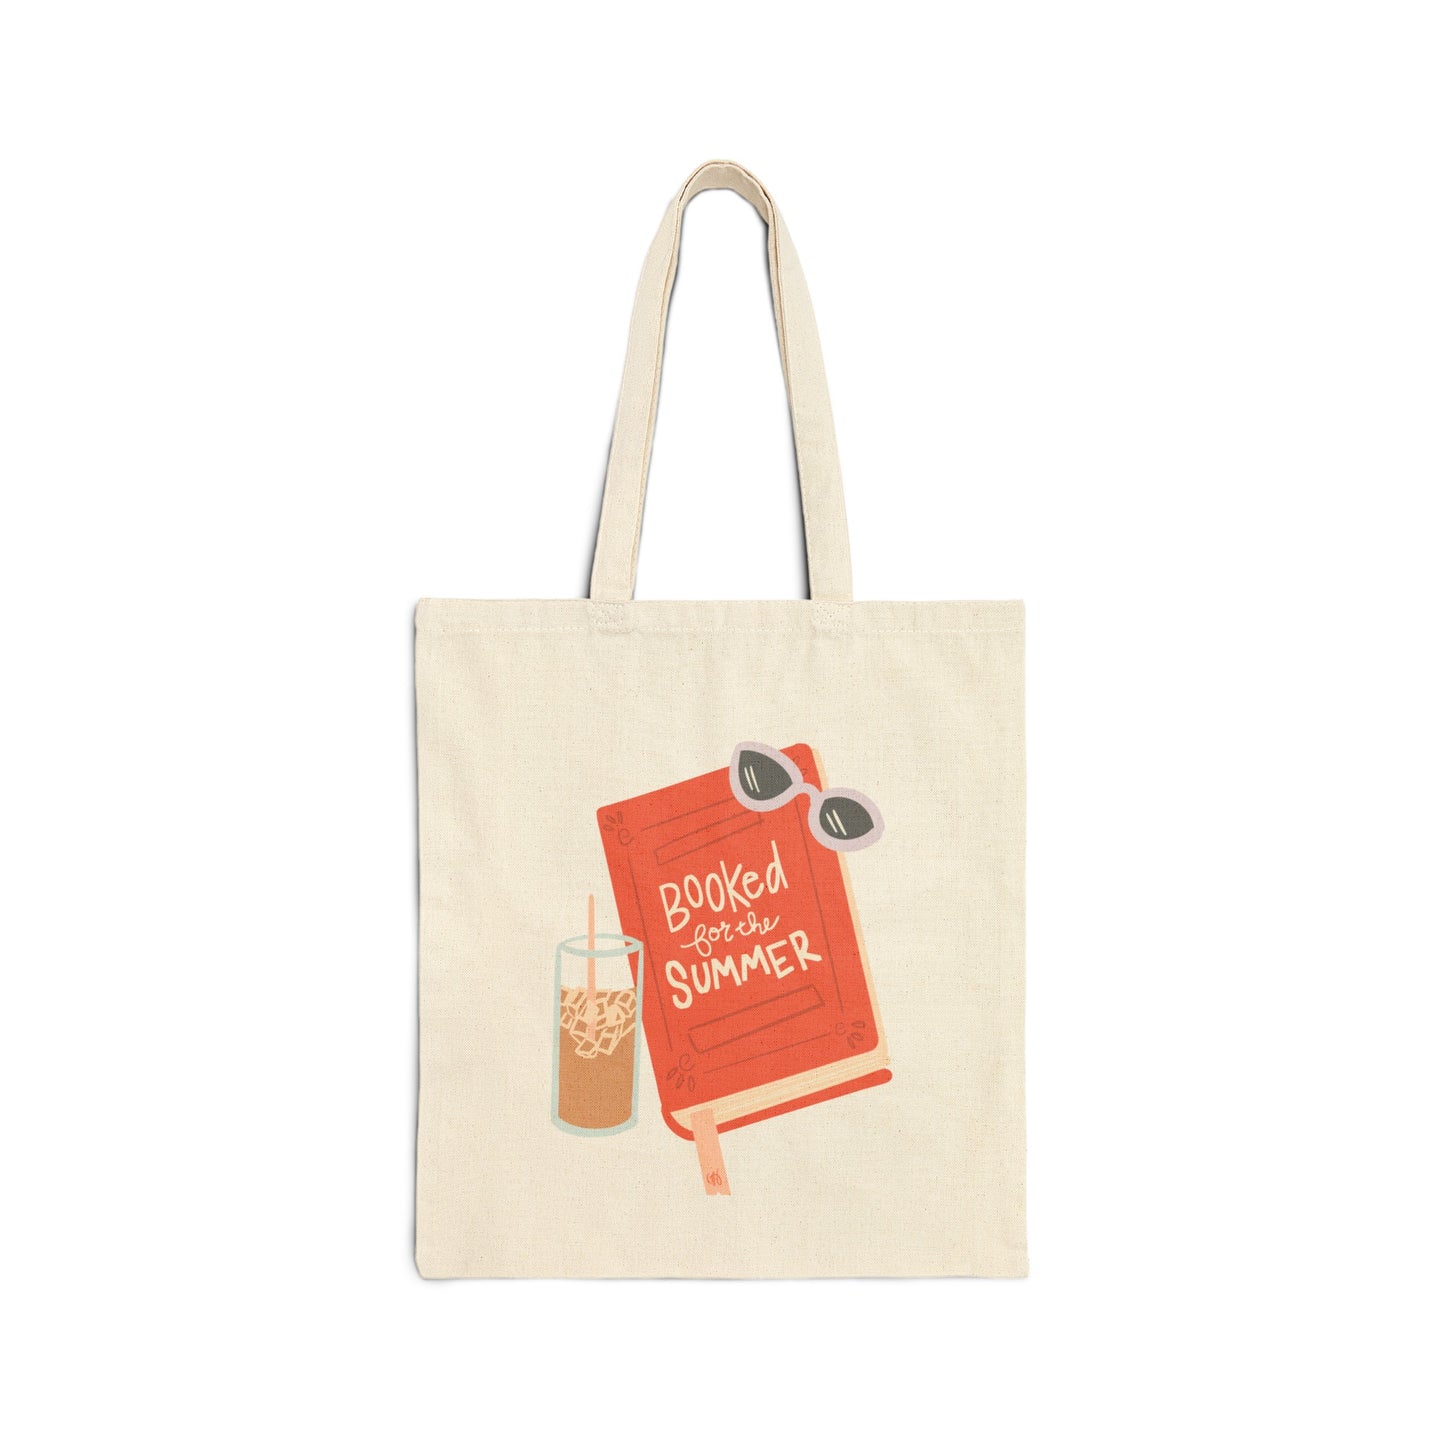 Booked for the Summer Tote Bag